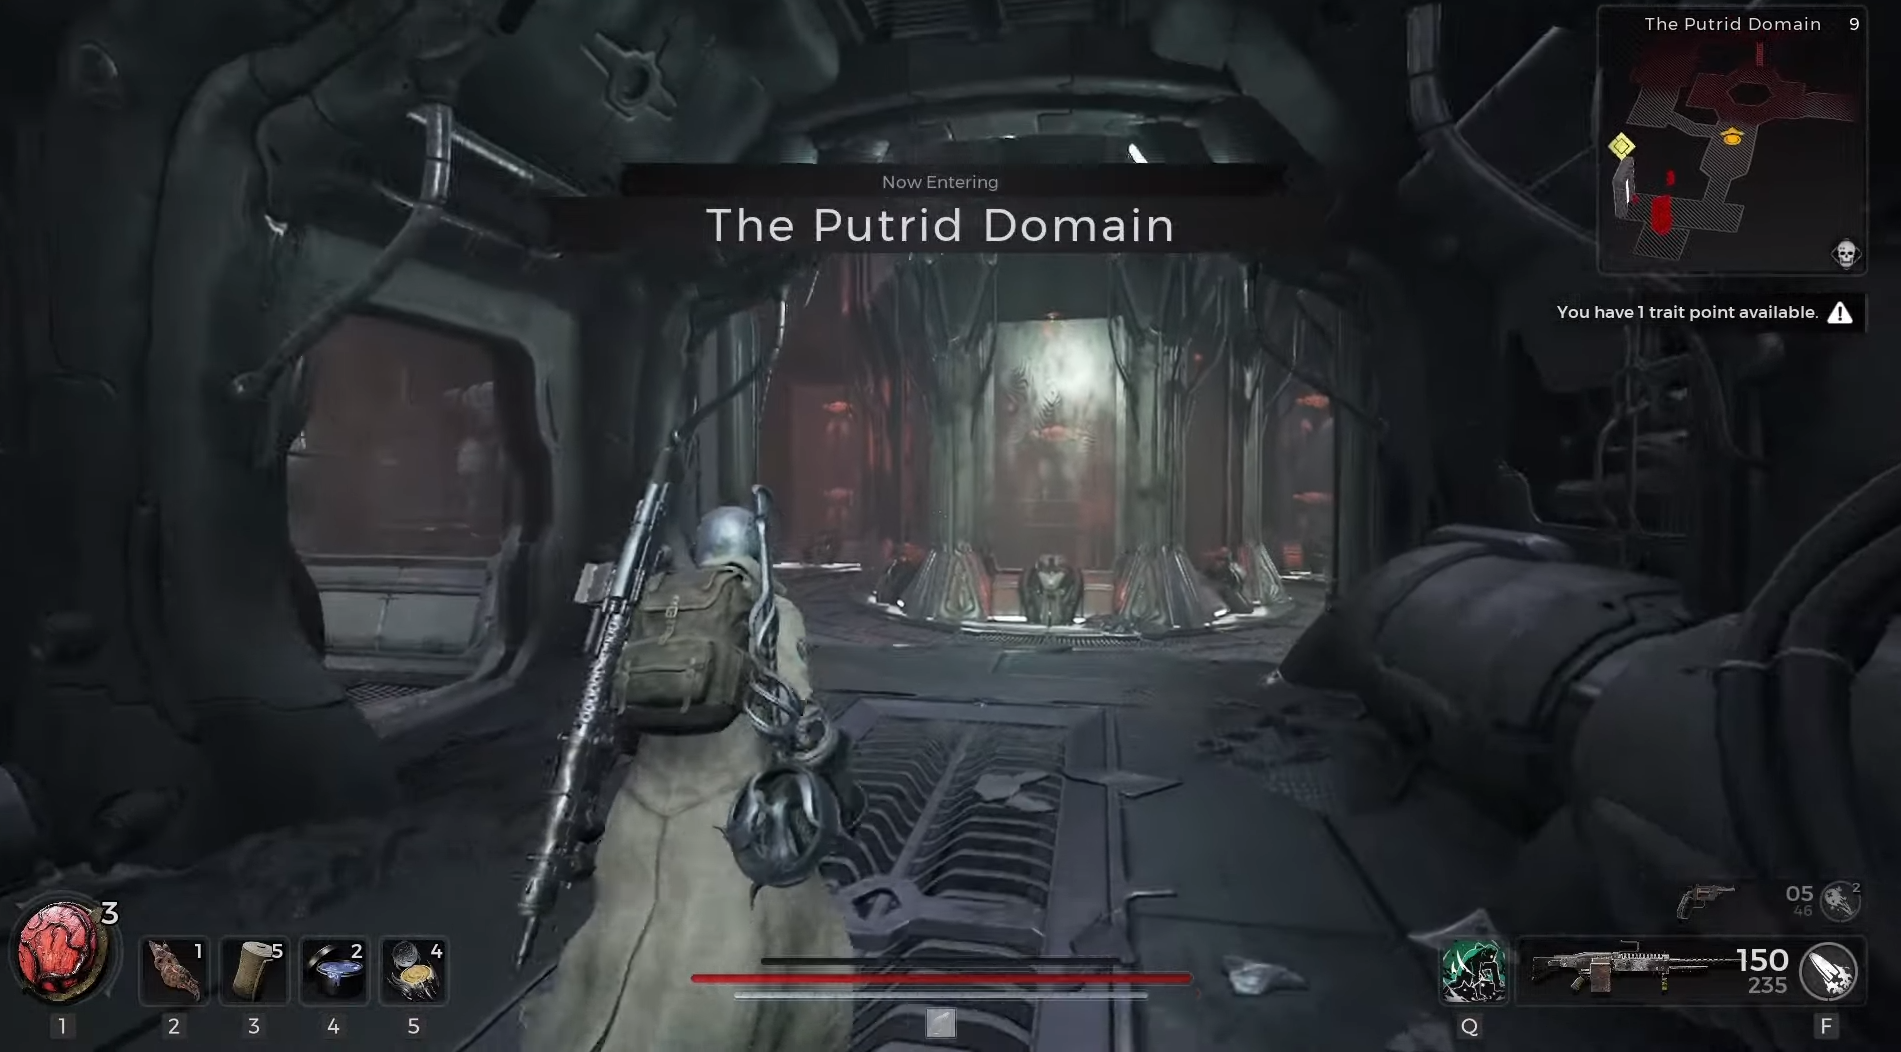 Player exploring The Putrid Domain in Remnant 2.